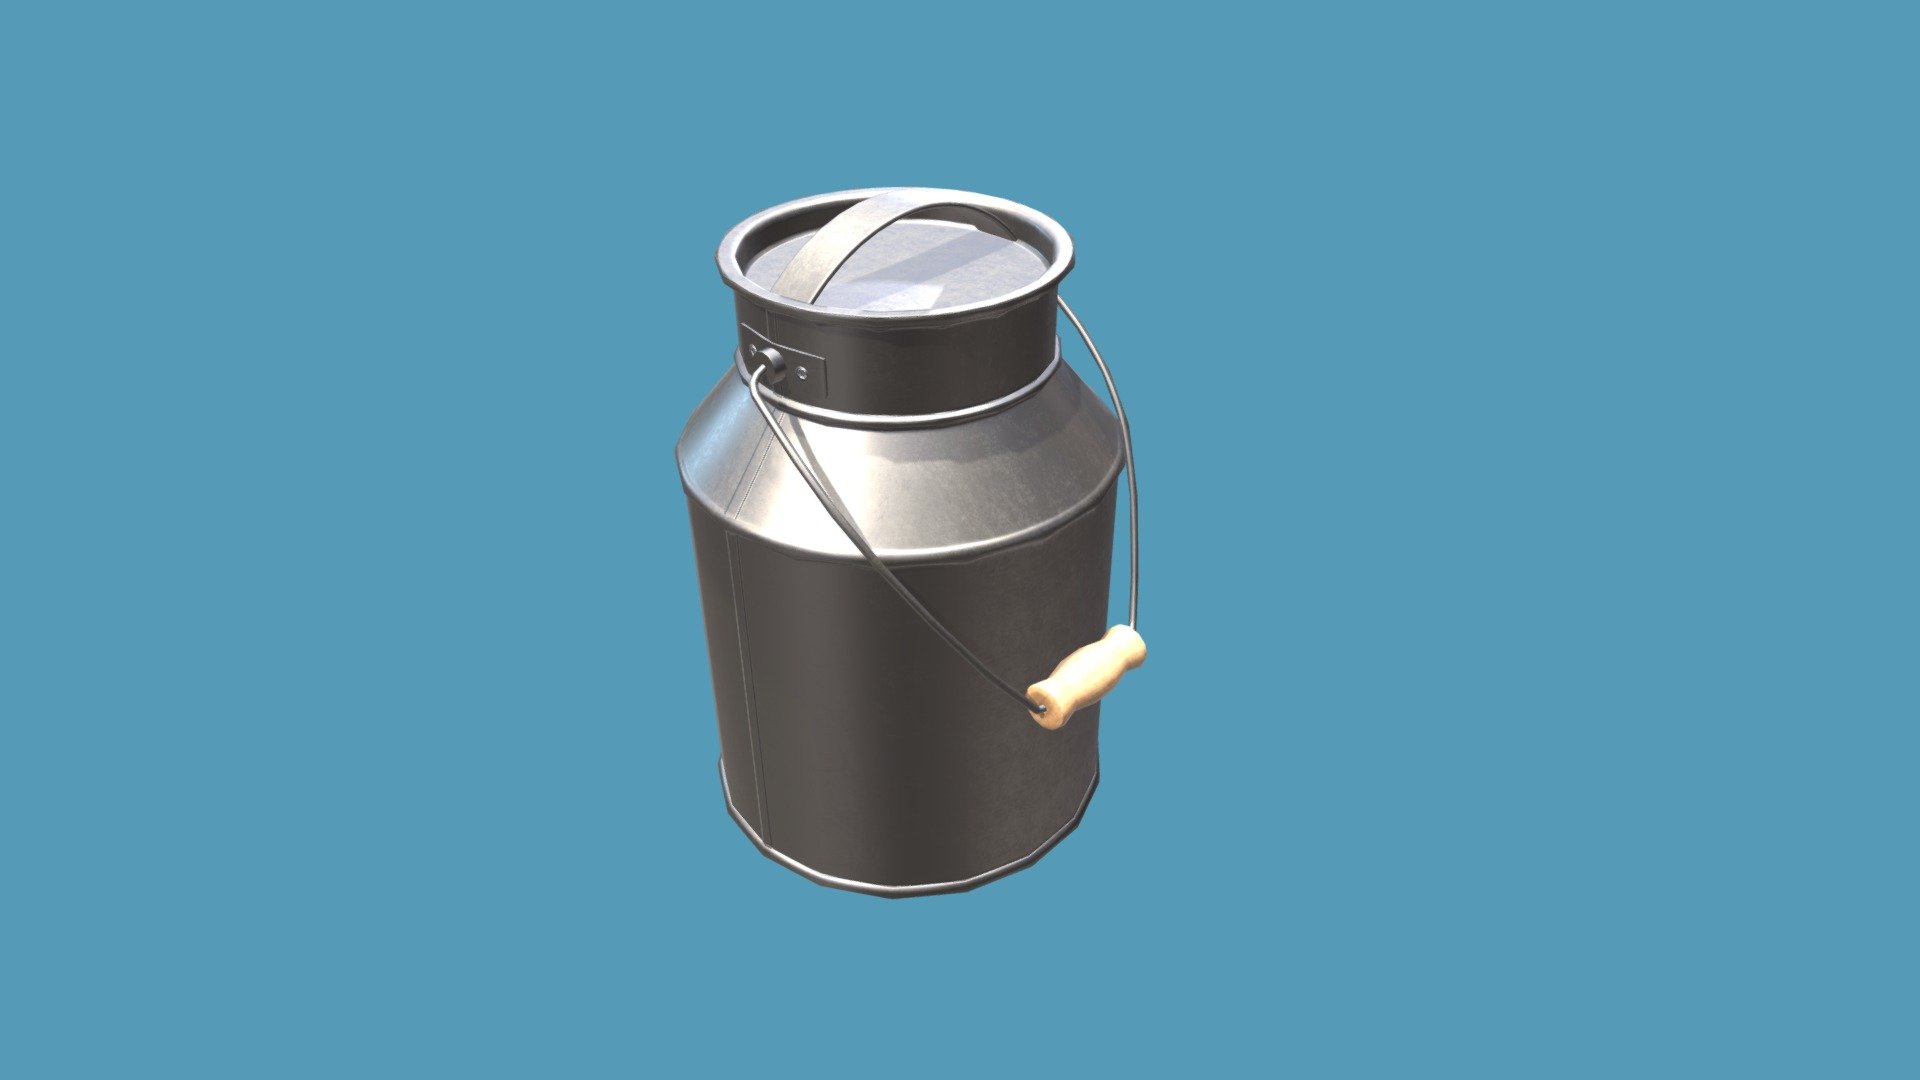 Vintage Milk Can




Model is low poly.

Model is Game-Ready/VR ready.

Model is UV mapped and unwrapped (non overlapping)

Asset is fully textured, 2048x2048 .png’s. PBR

Model is ready for Unity and Unreal game engines.

File Format: .FBX

Additional zip file contains all the files 3d model